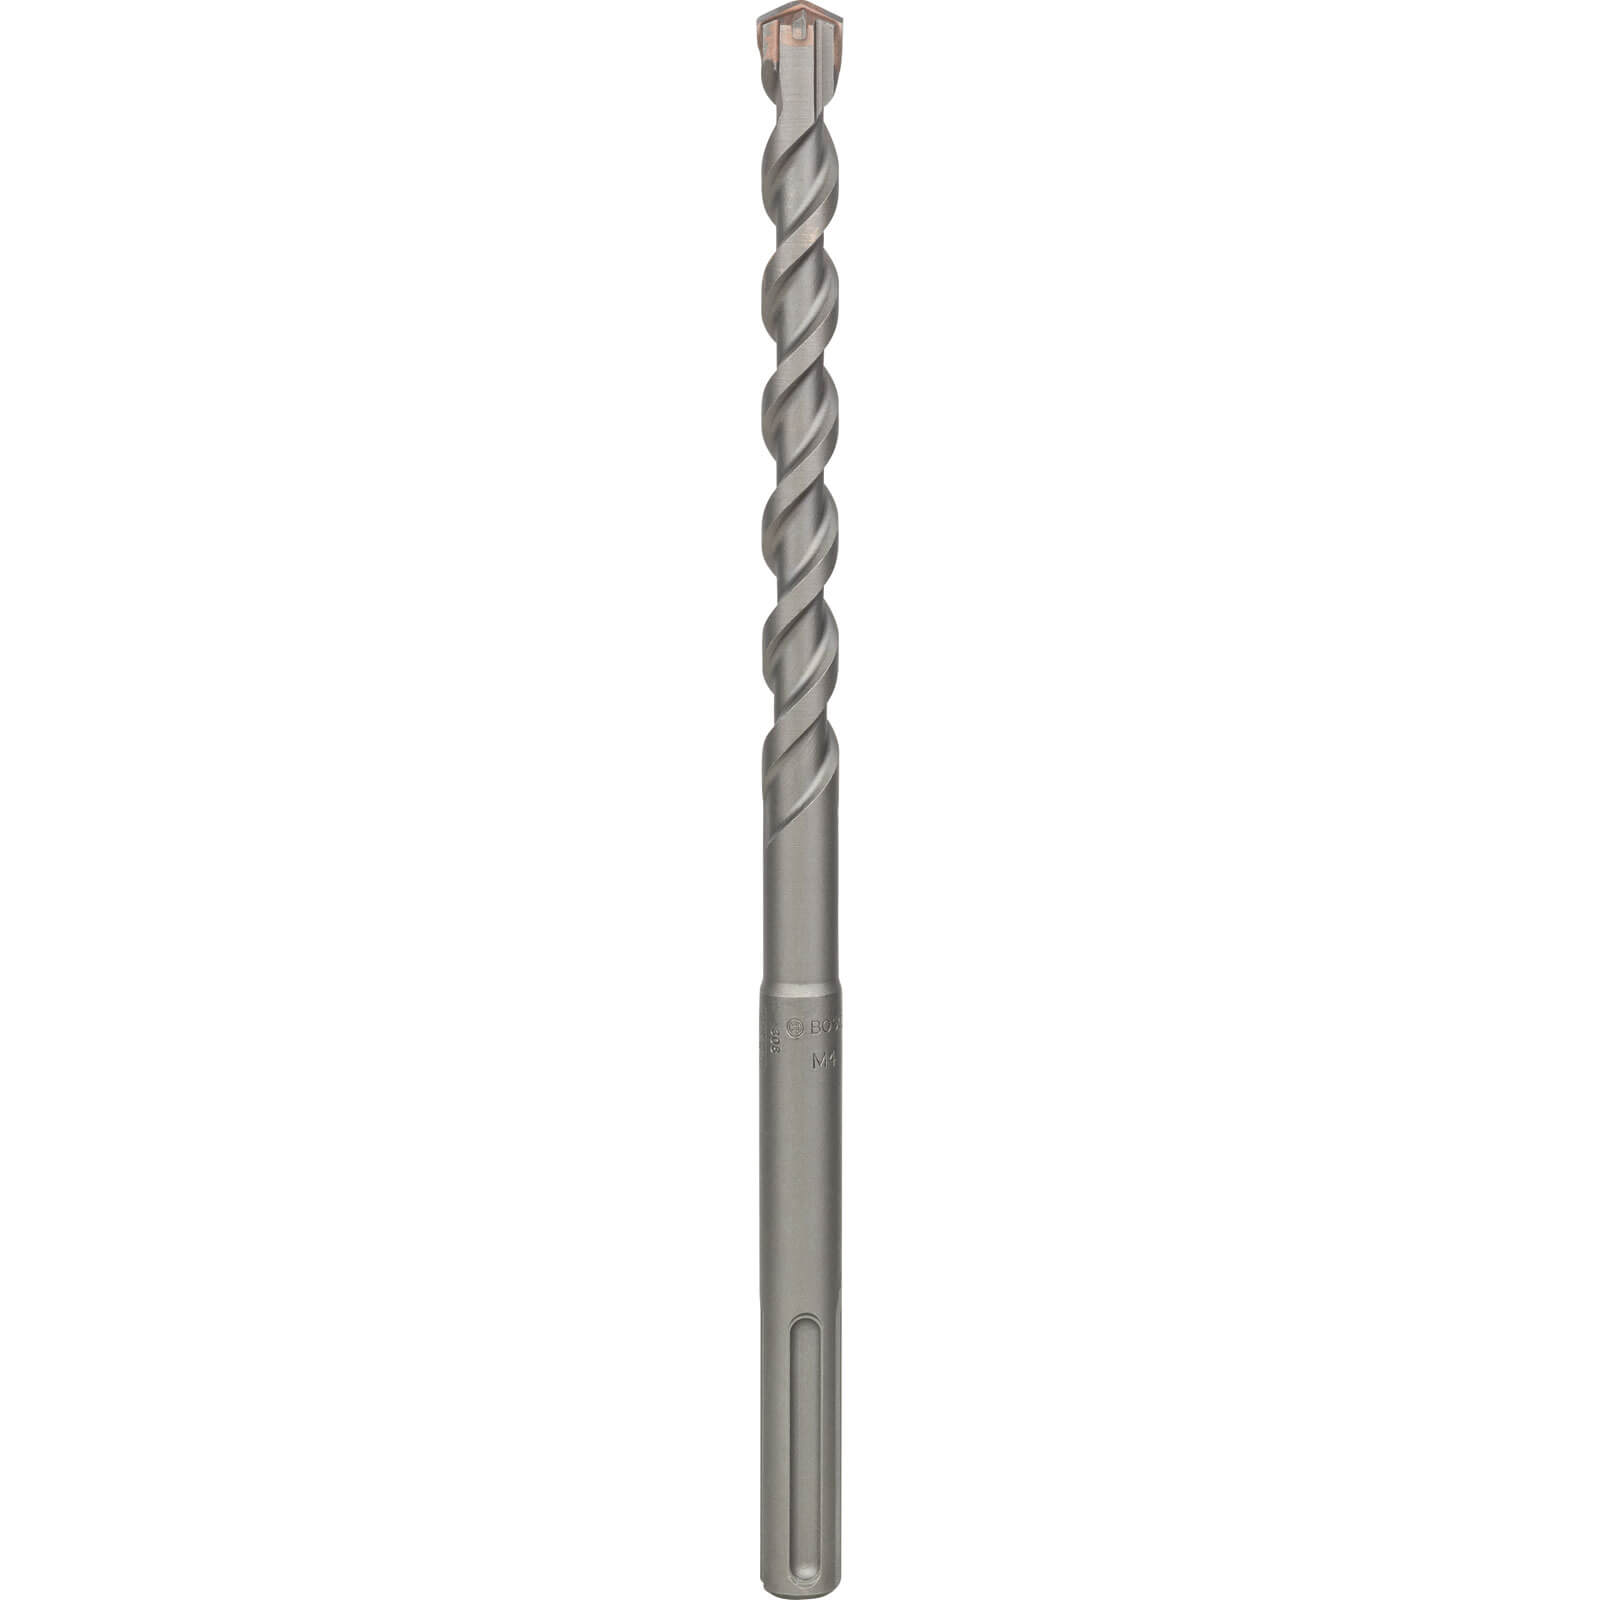 Image of Bosch M4 SDS Max Masonry Drill Bit 18mm 340mm Pack of 1